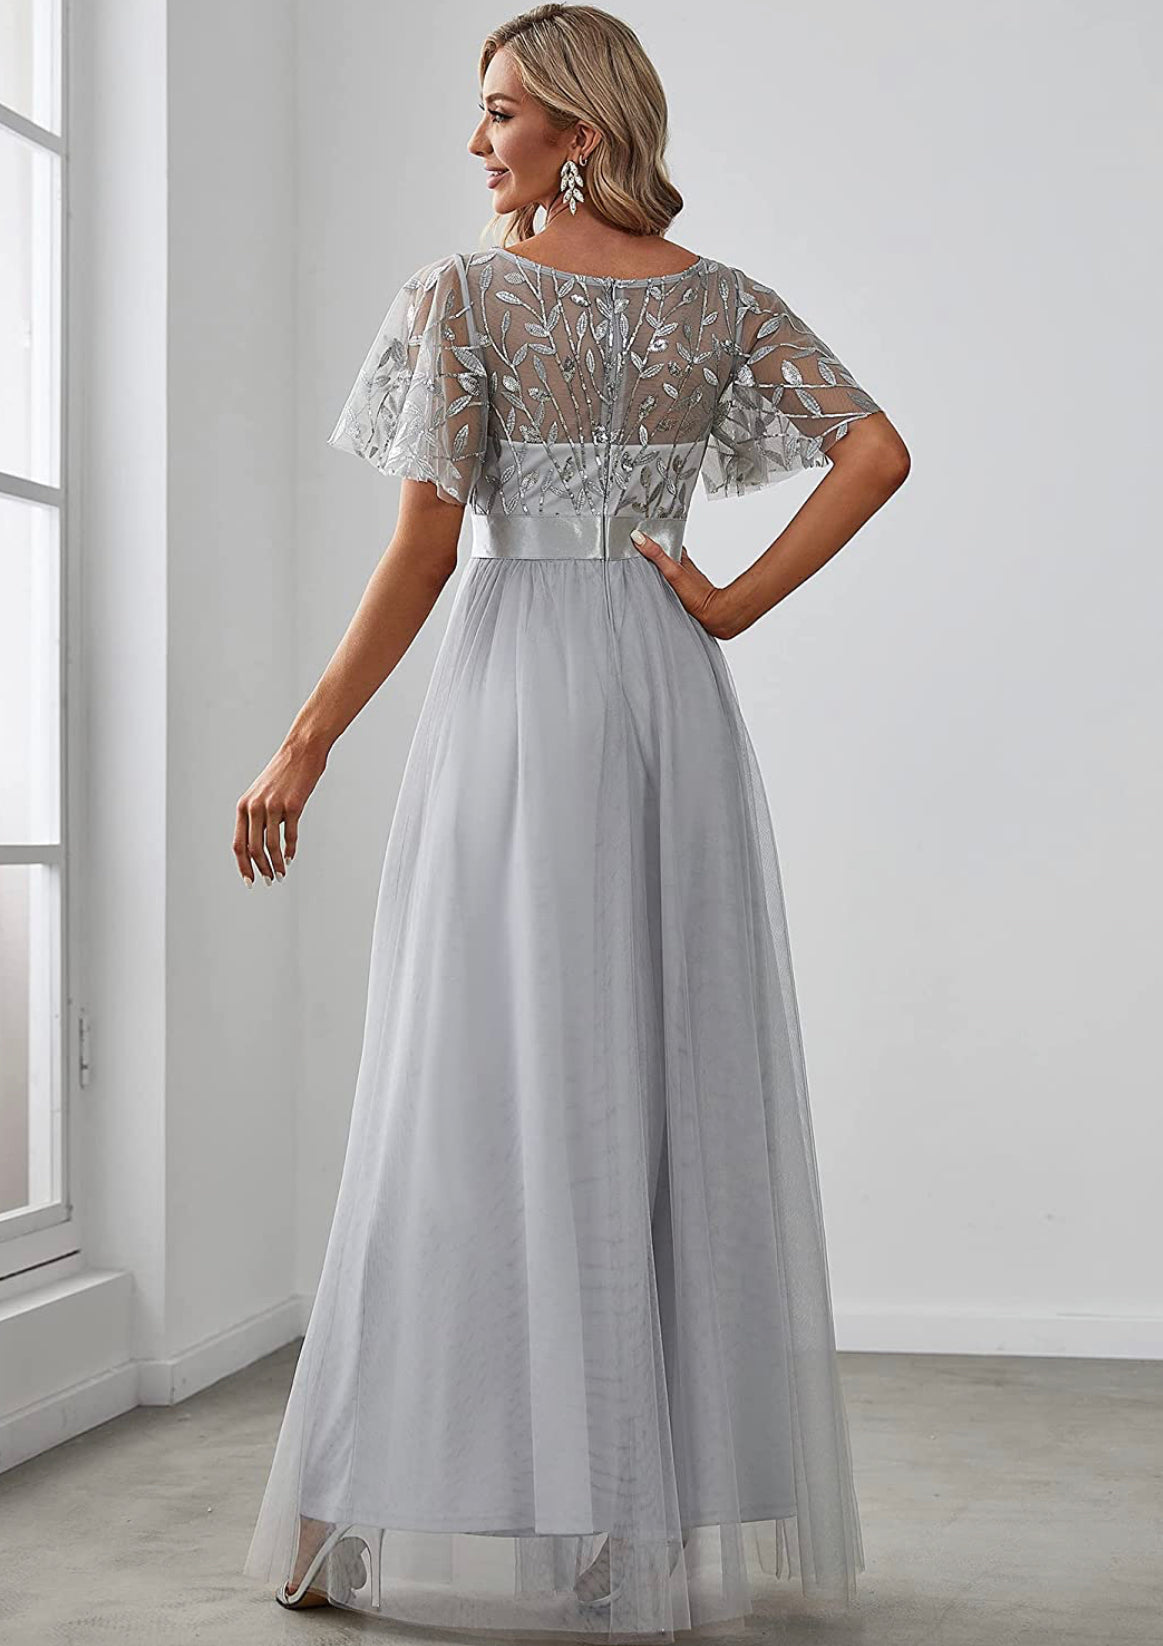 Empire Waist Embroidery Formal Dress (US Sizes 4 - 26) Gray